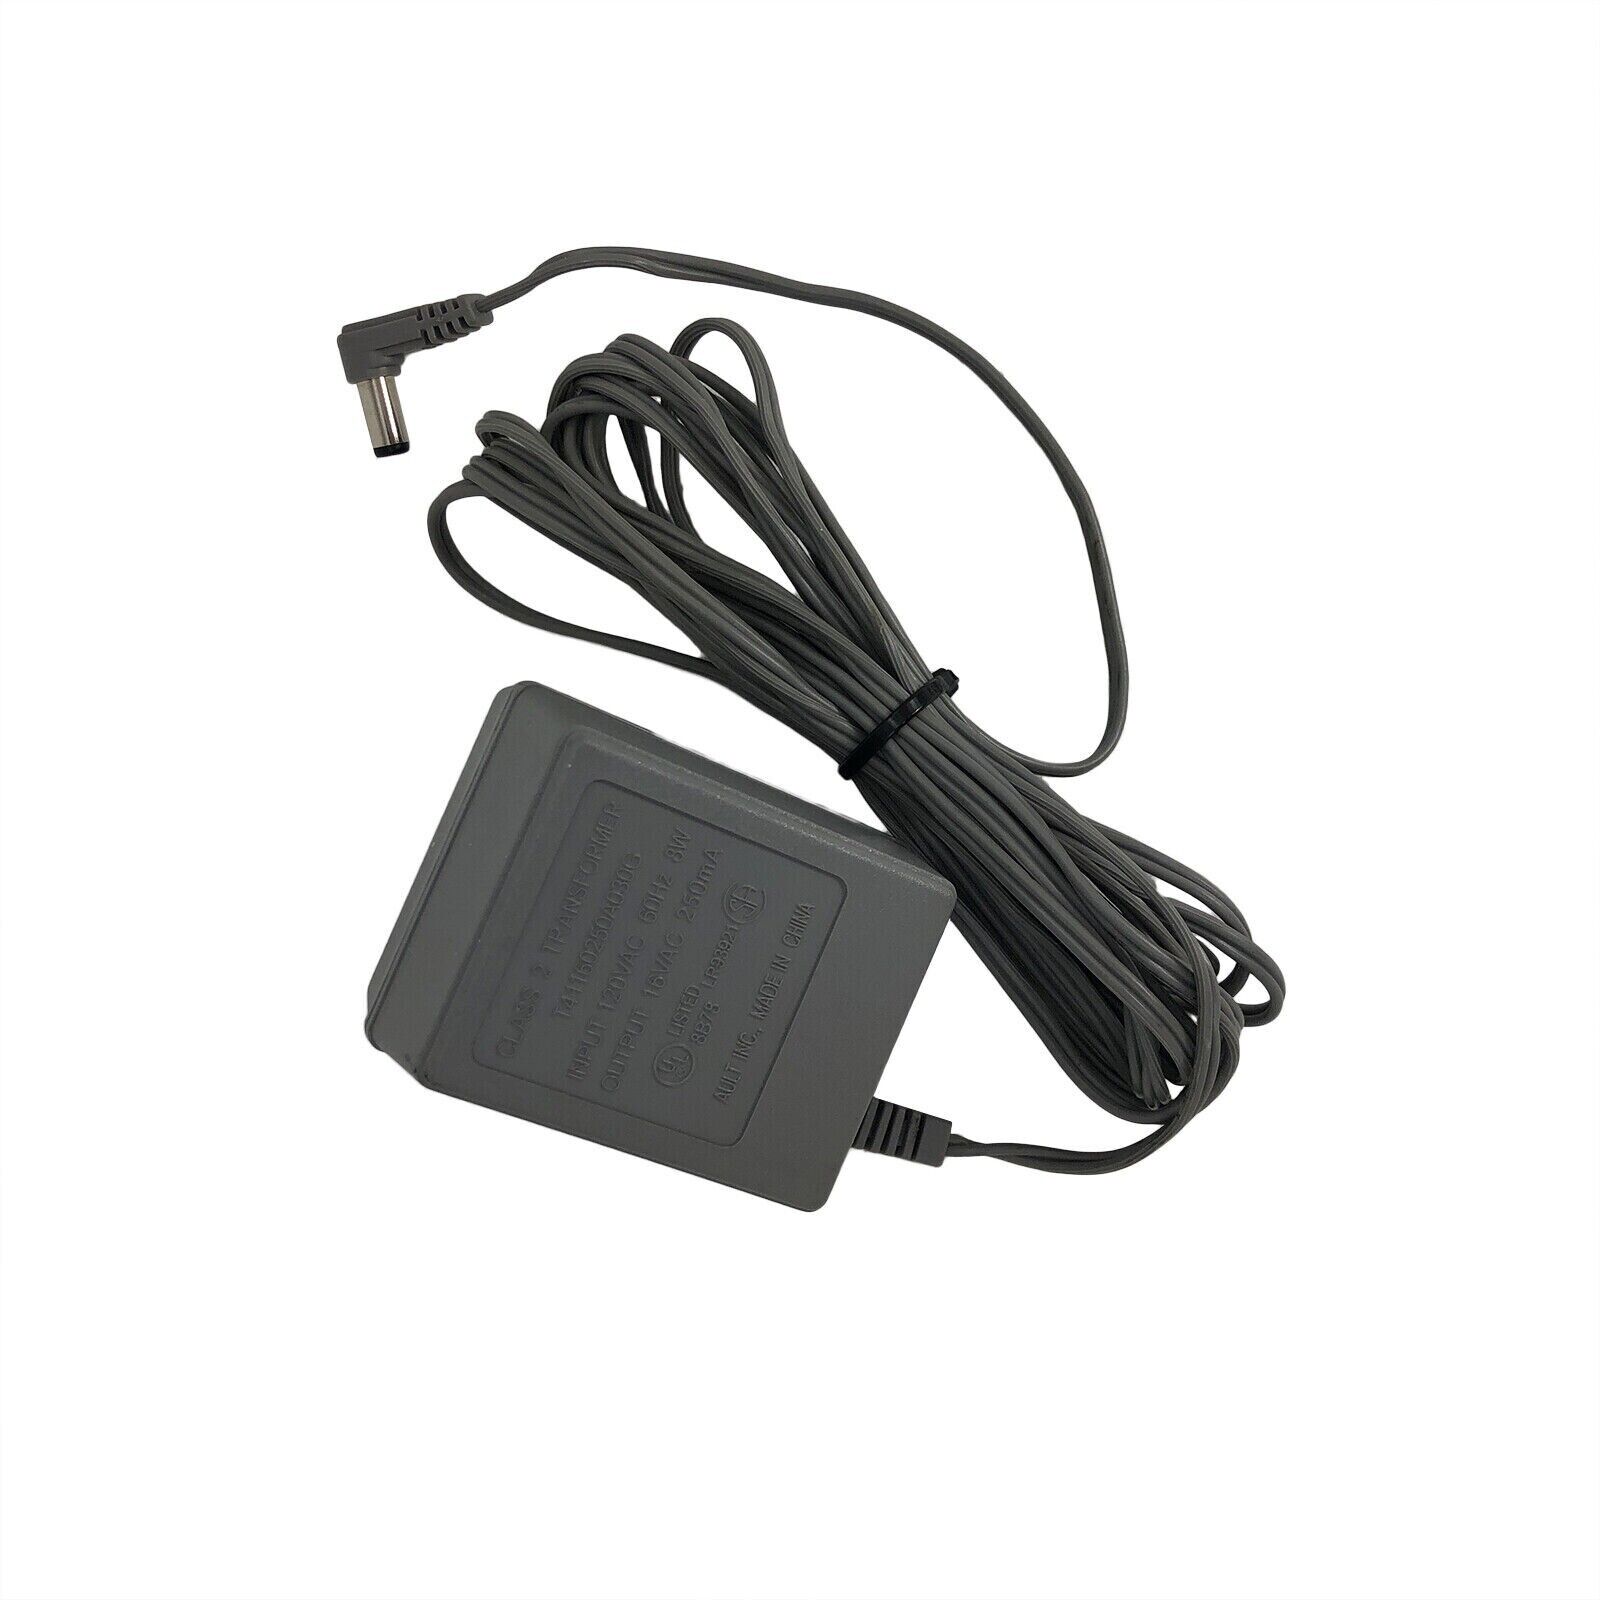 *Brand NEW*Genuine 16 V 250mA AC Adapter for Nortel Meridian Aastra 9417 M9417 9417CW M9417CW Phone POWER Supp